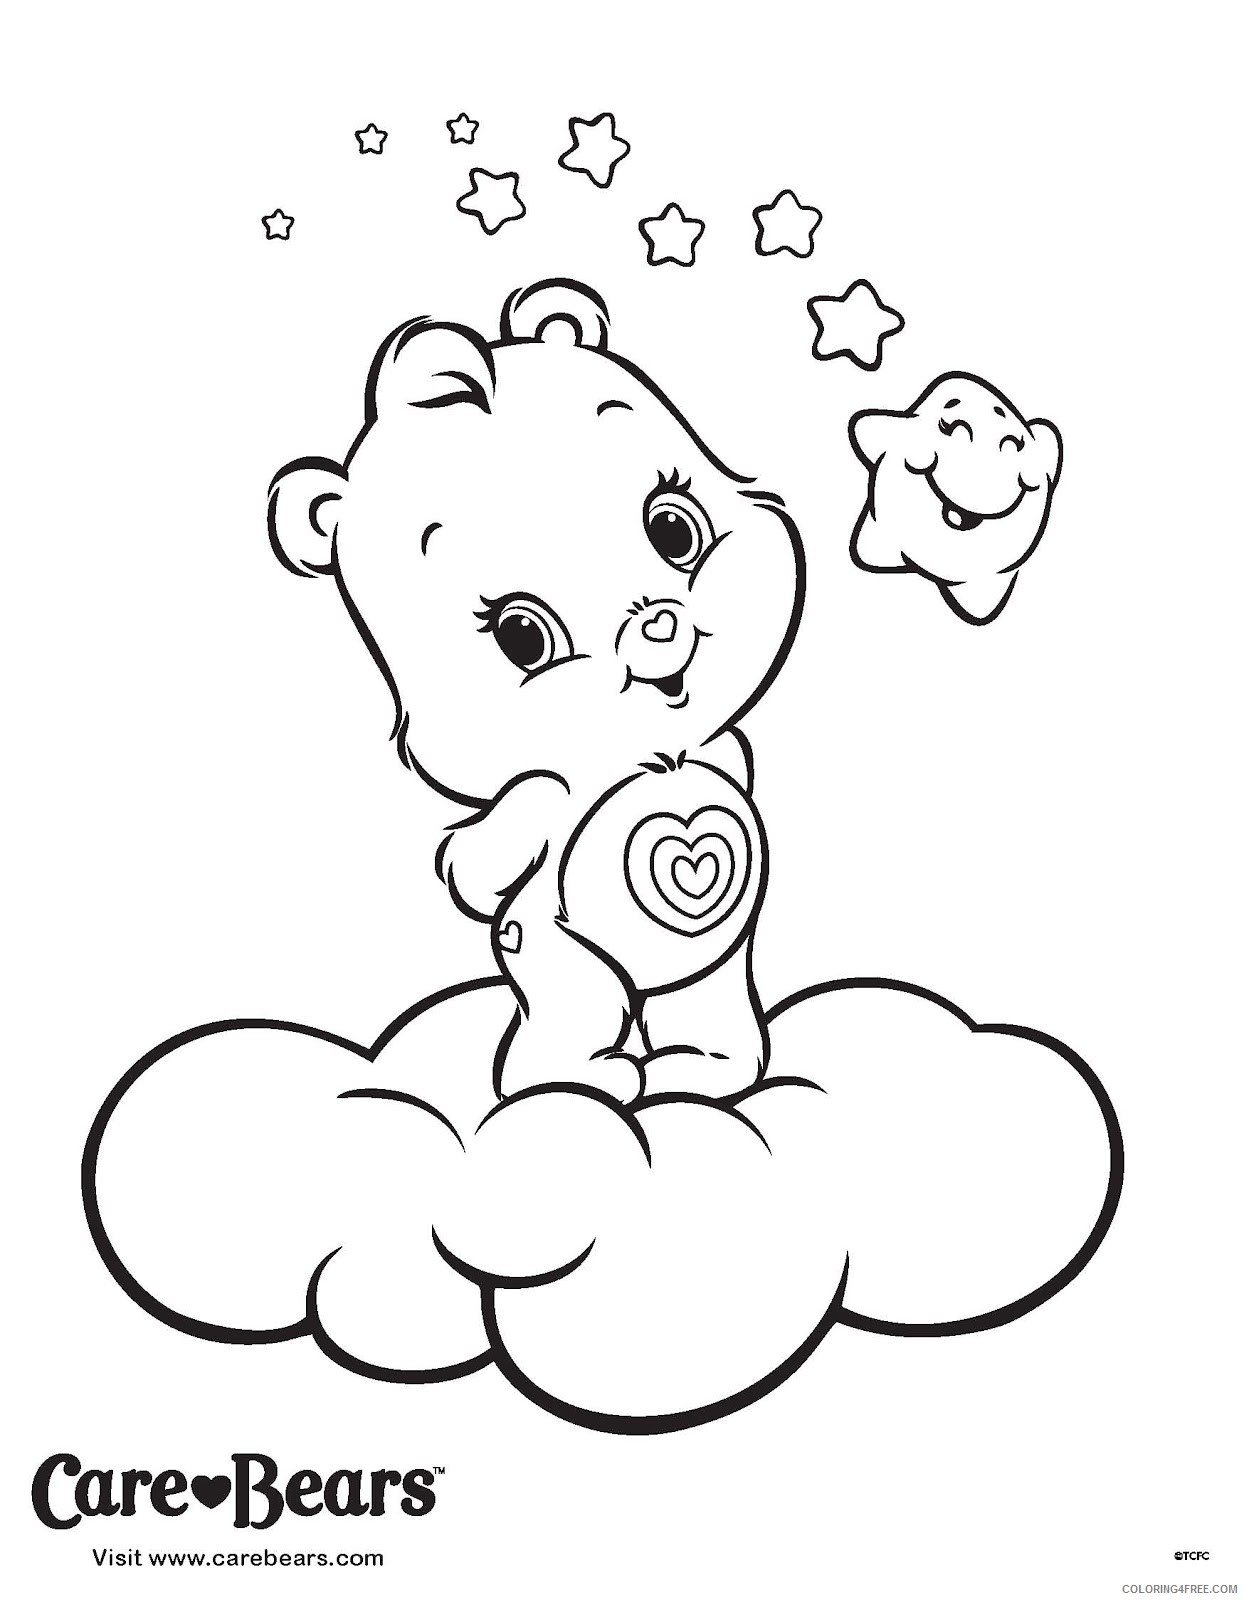 wonderheart care bears coloring pages Coloring4free